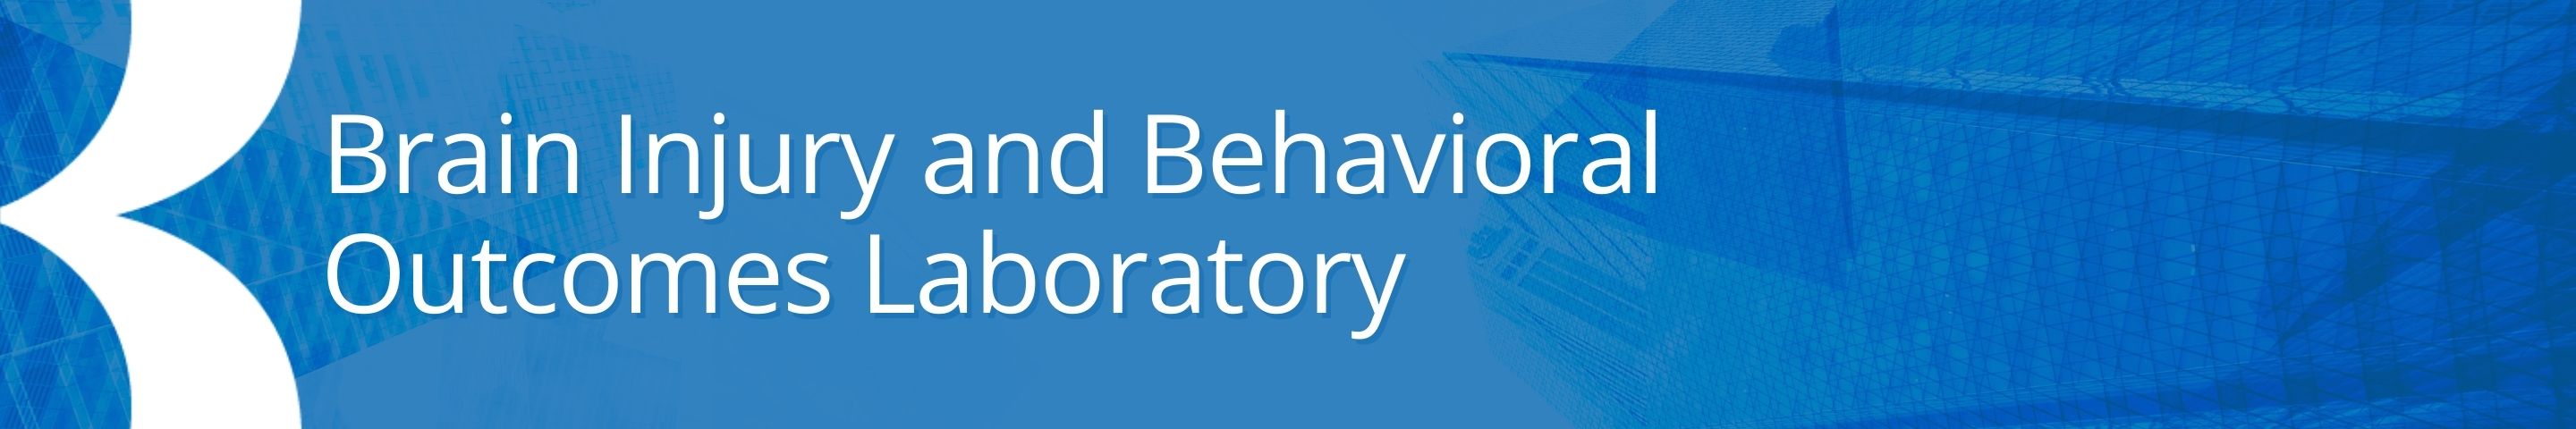 blue banner Brain Injury and Behavioral Outcomes Laboratory